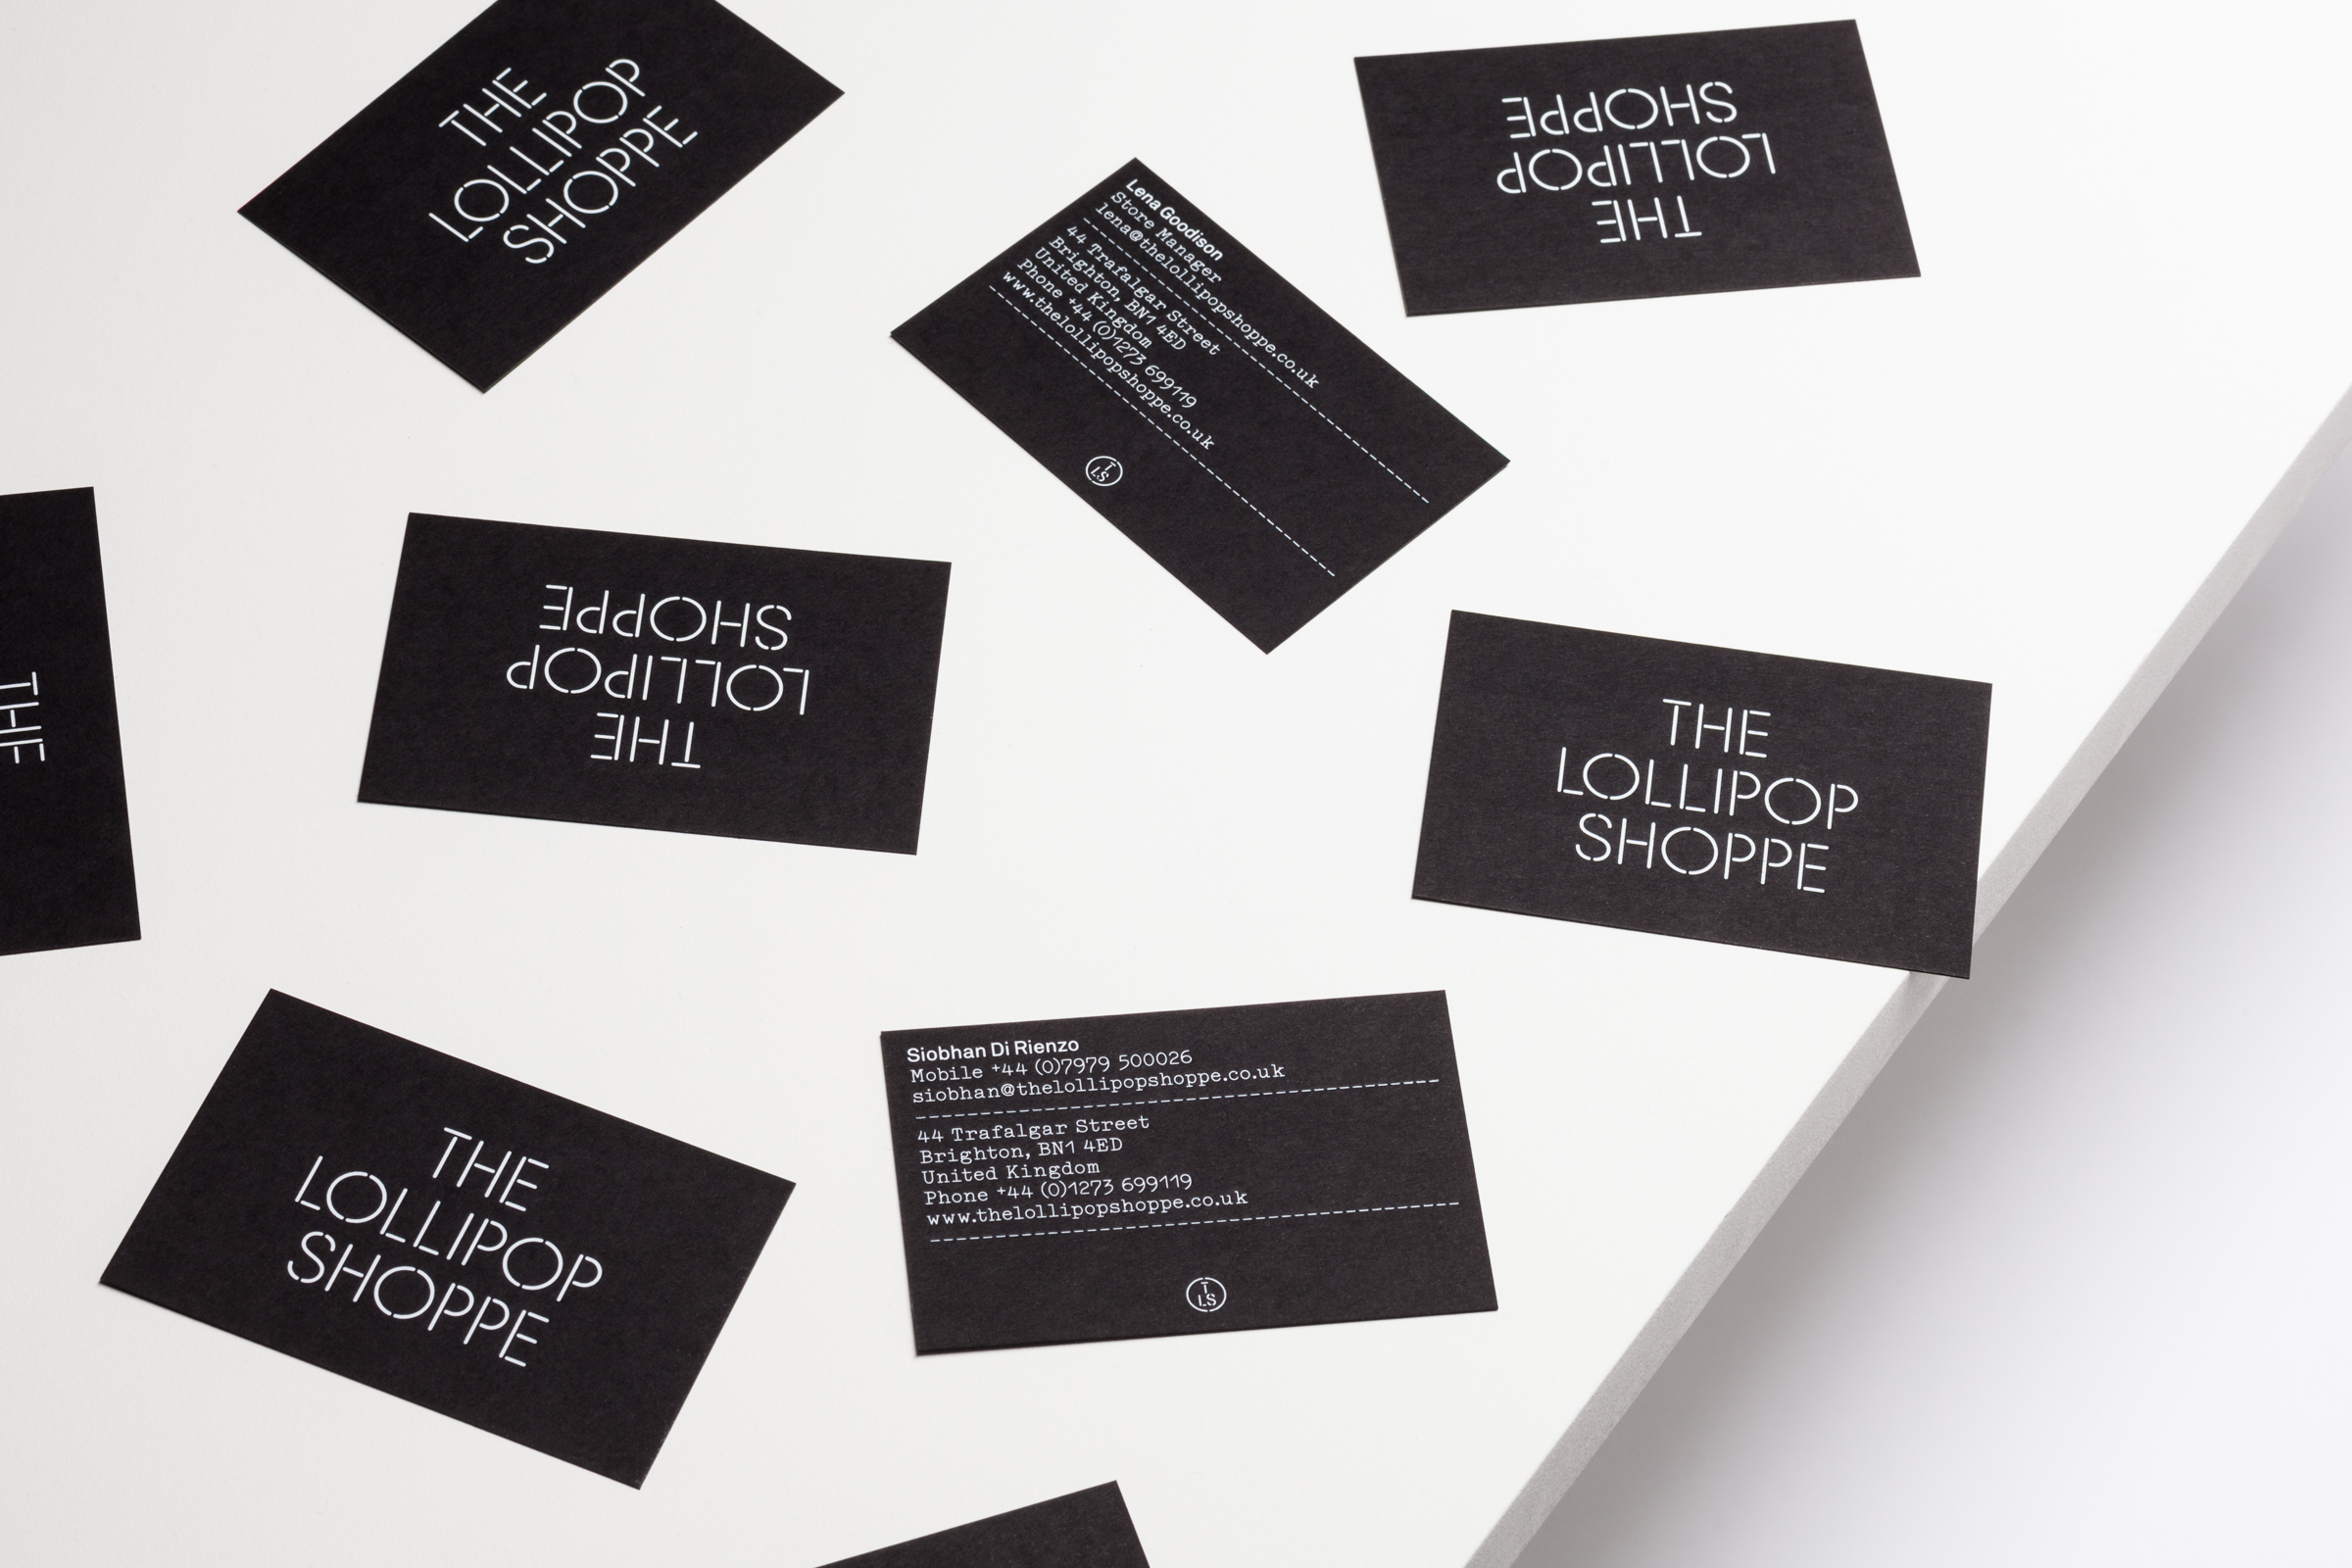 Logo and business cards with white foil detail created by Studio Makgill for designer furniture and accessories retailer The Lollipop Shoppe